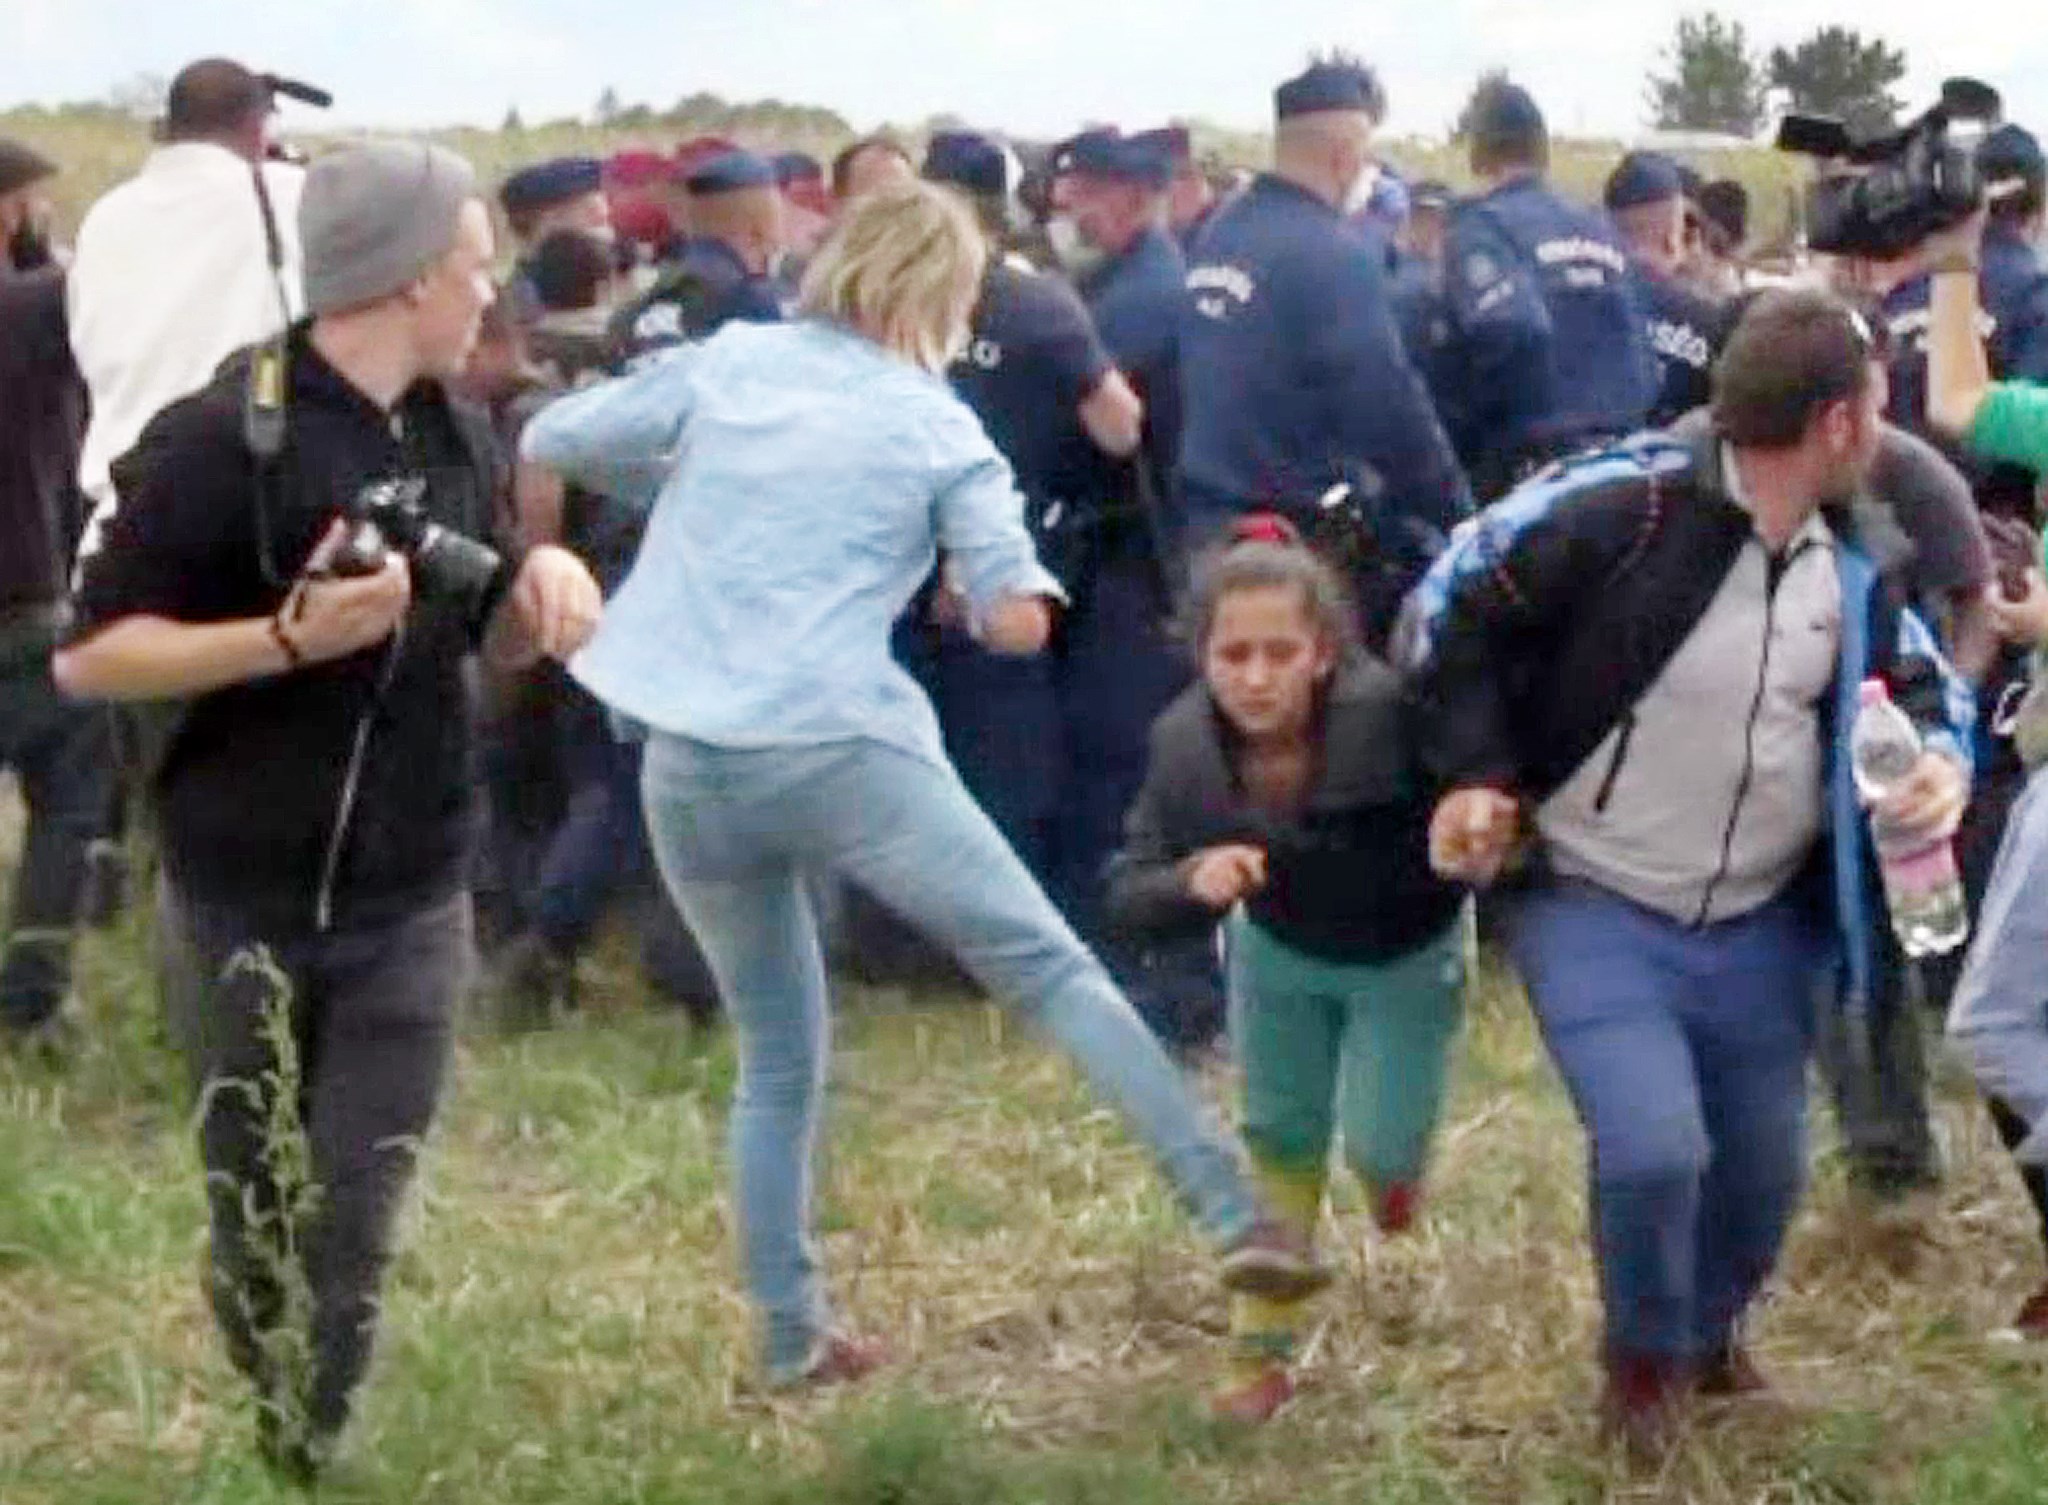 This video grab made on September 9, 2015 shows a Hungarian TV camerawoman kicking a child as she run with other migrants from a police line during disturbances at Roszke, southern Hungary. (-&mdash;AFP/Getty Images)